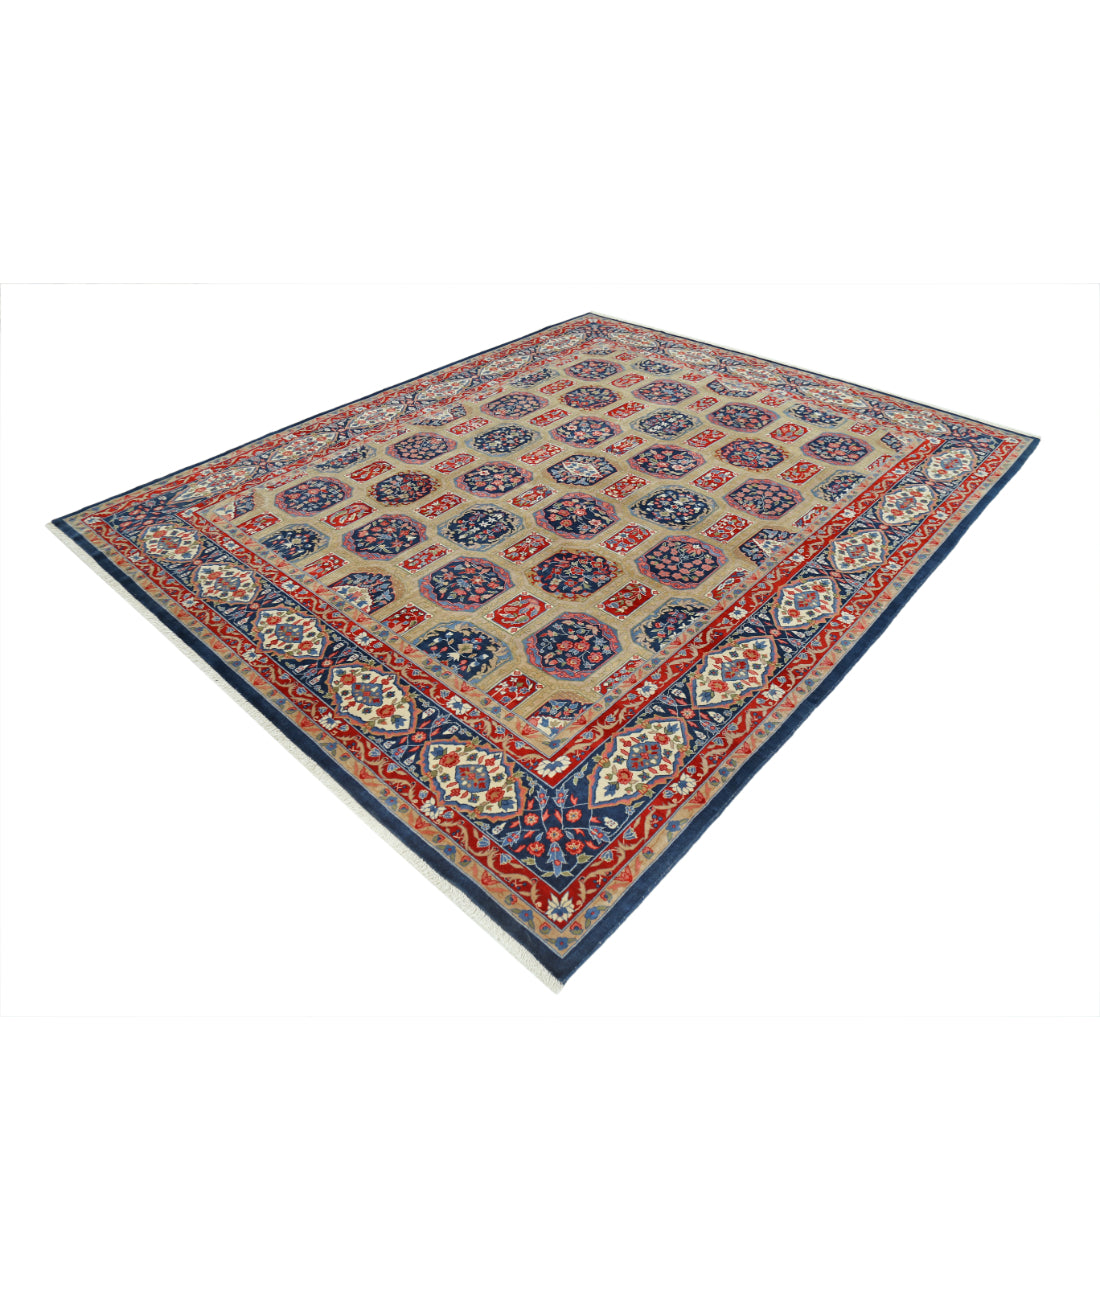 Heritage 7' 11" X 9' 9" Hand-Knotted Wool Rug 7' 11" X 9' 9" (241 X 297) / Beige / Blue